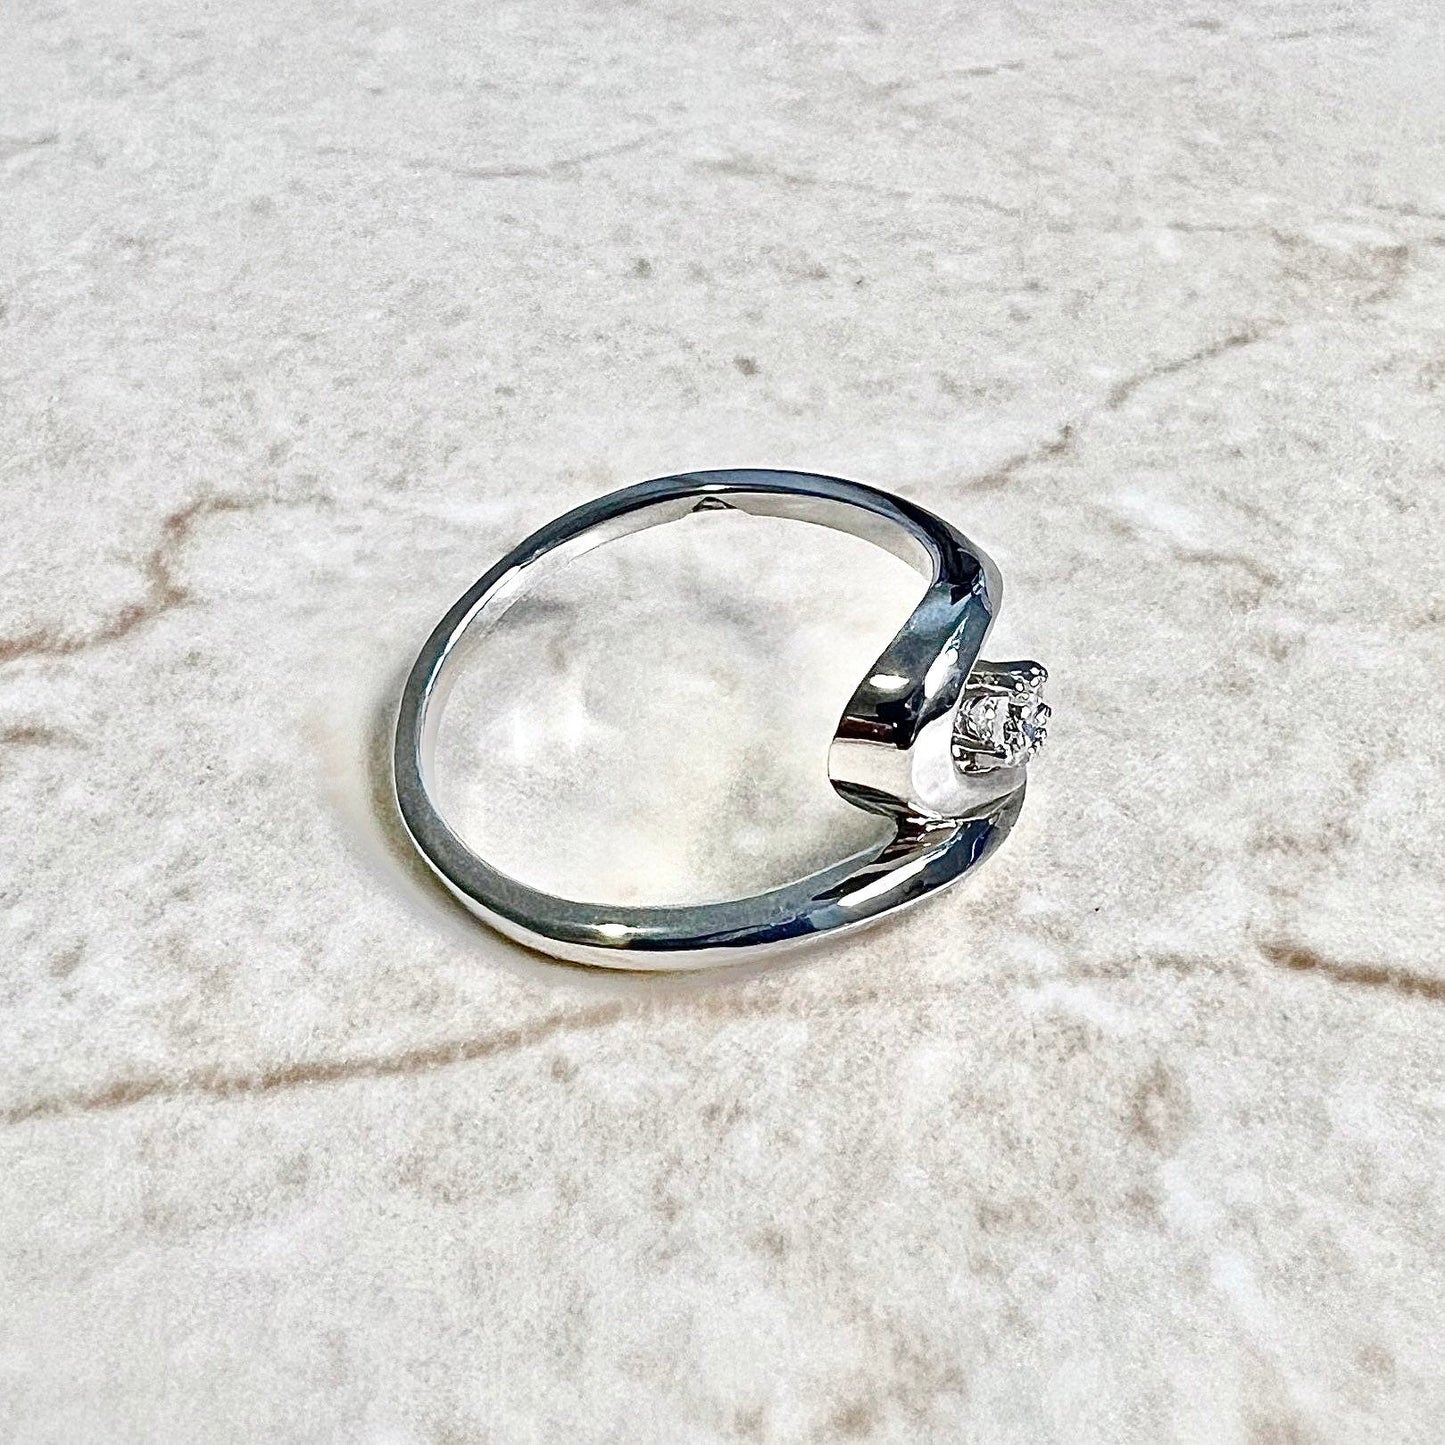 14K 3 Stone Diamond Ring - White Gold Three Stone Ring - Cocktail Ring - Anniversary Ring - Promise Ring - Birthday Gift -Best Gifts For Her